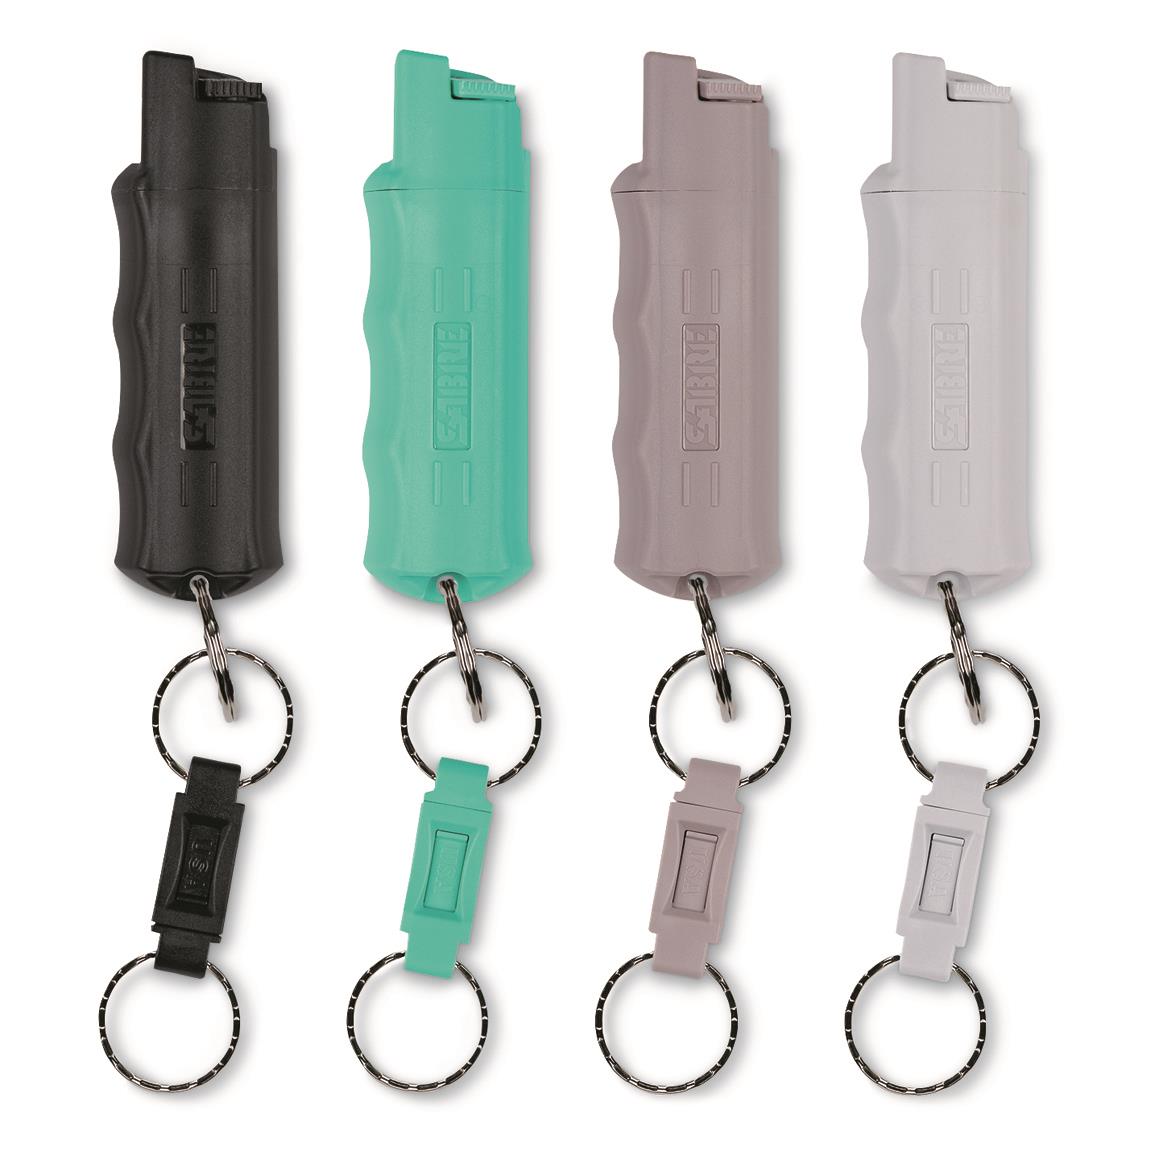 Sabre Red Pepper Spray Key Chain, 4 Pack